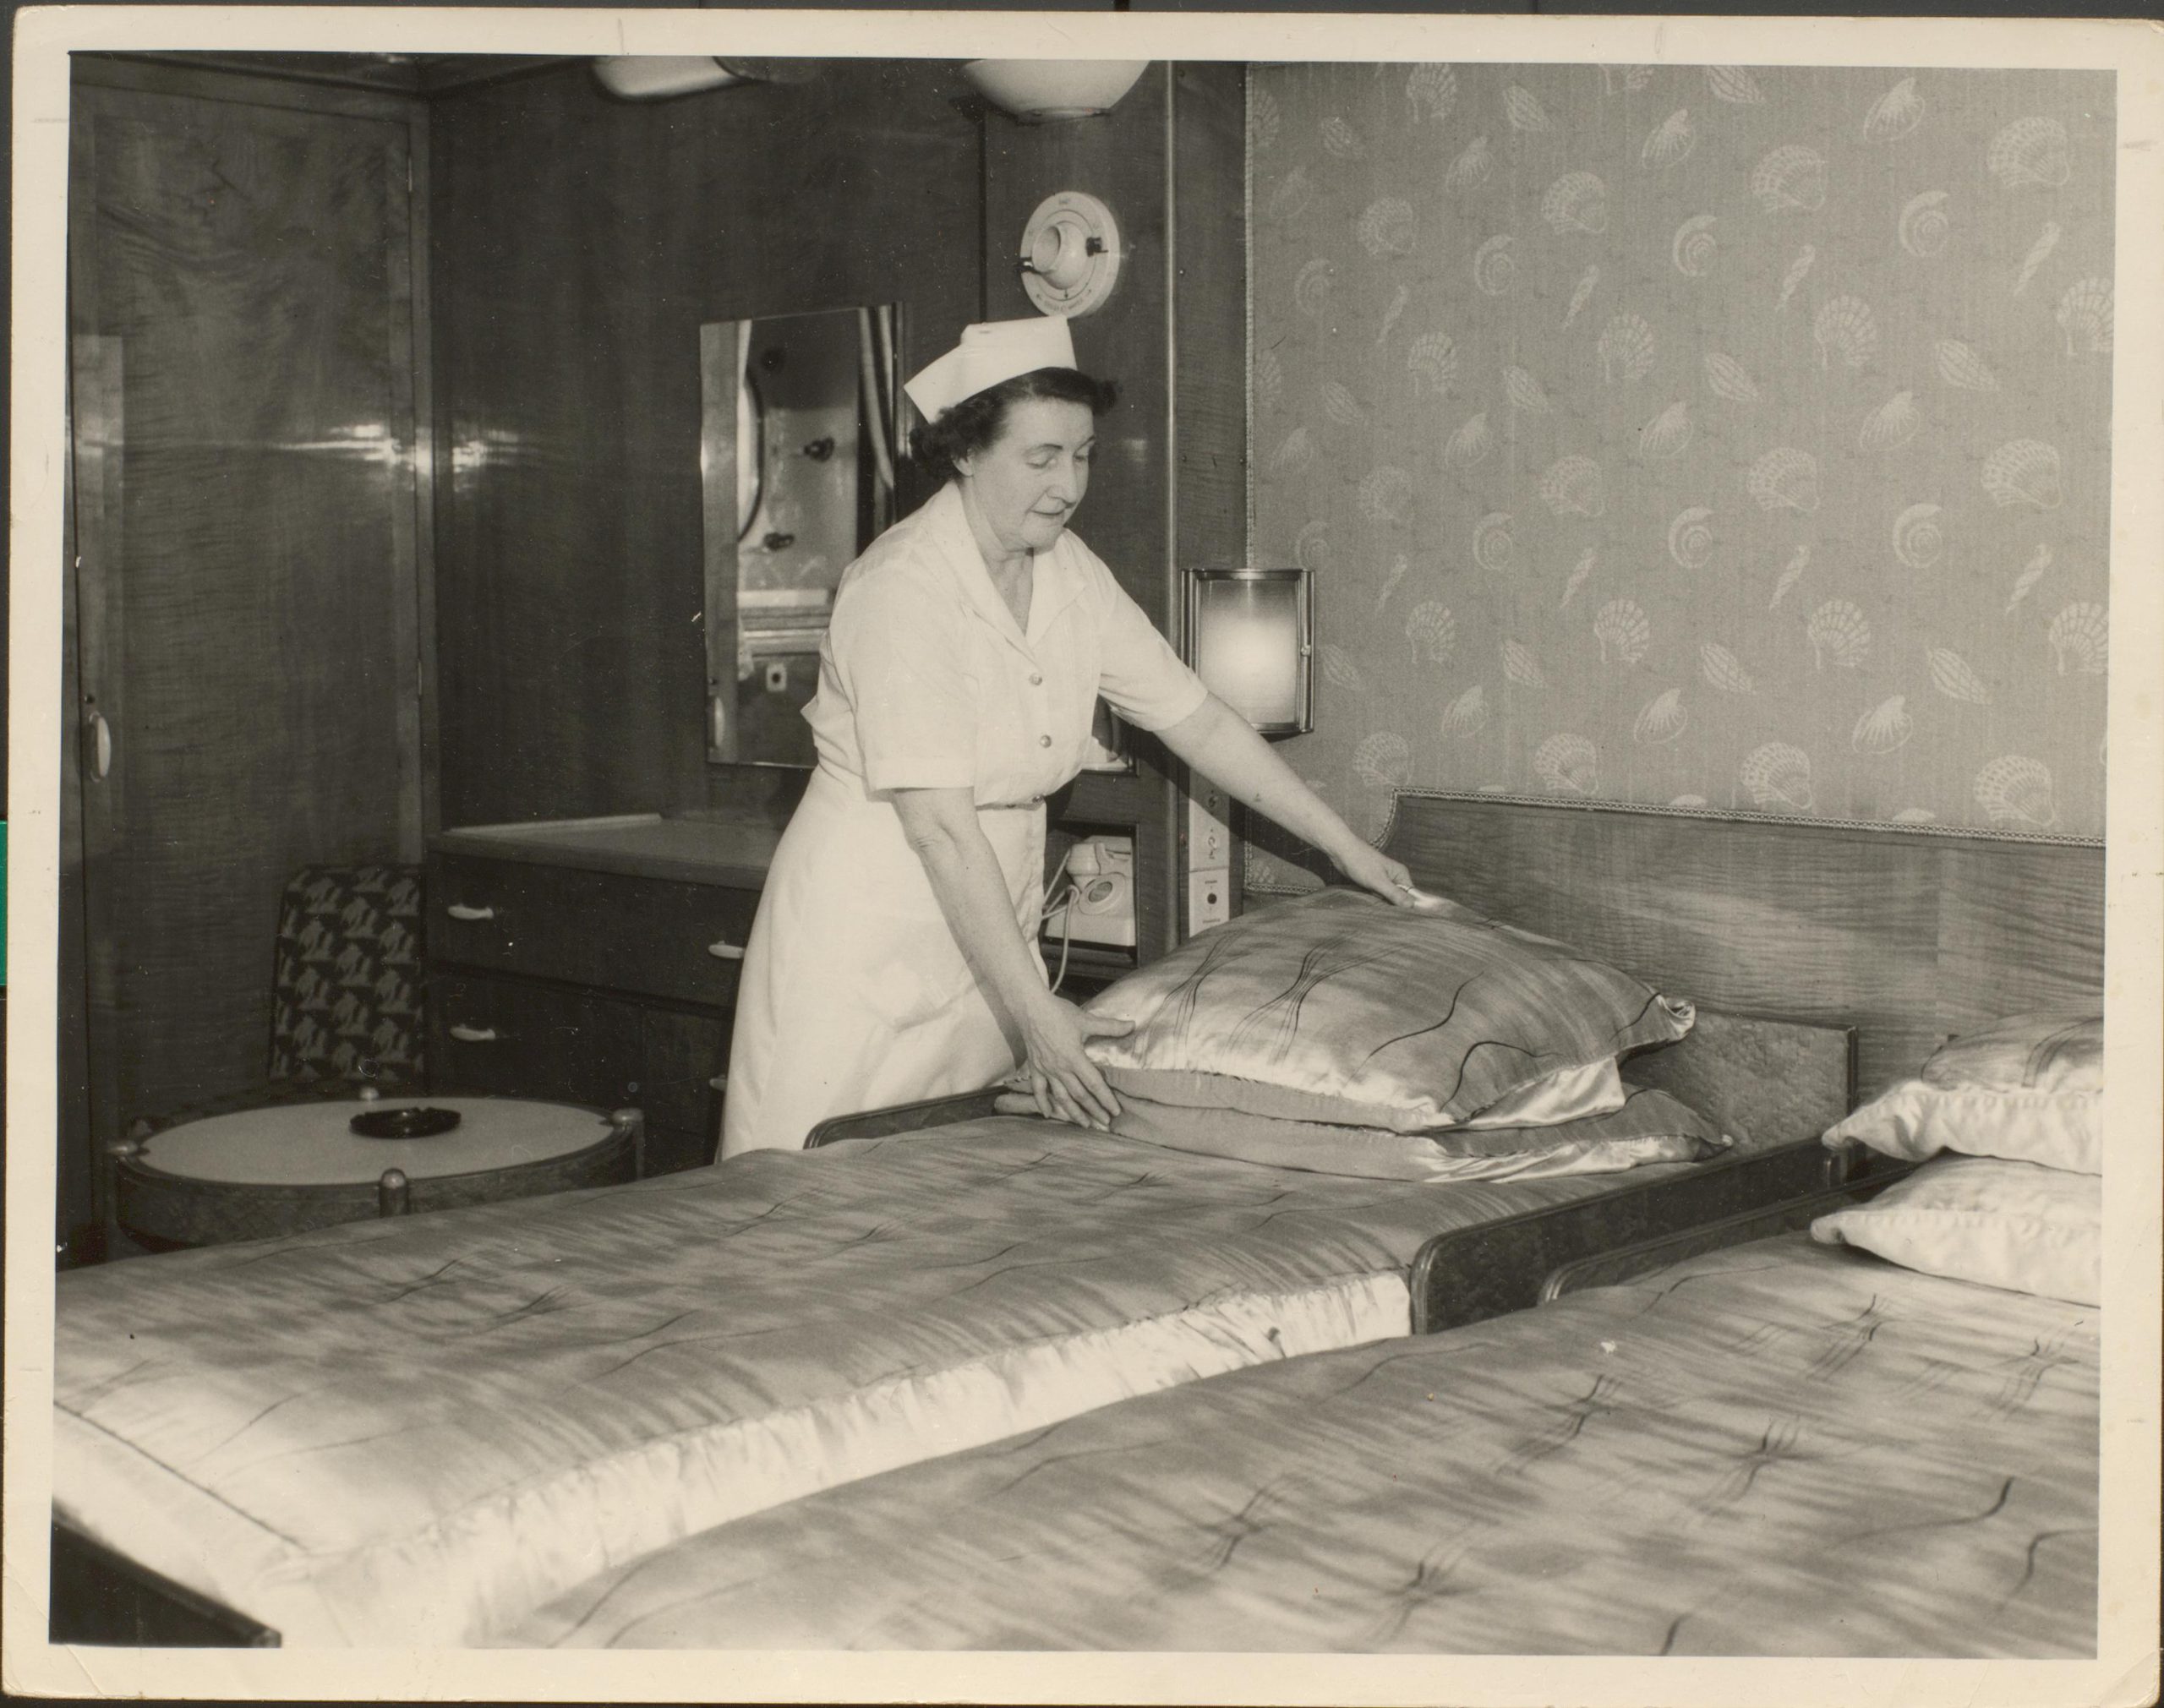 Black and white photograph of female in uniform arranging pillows on a single bed in a cabin.